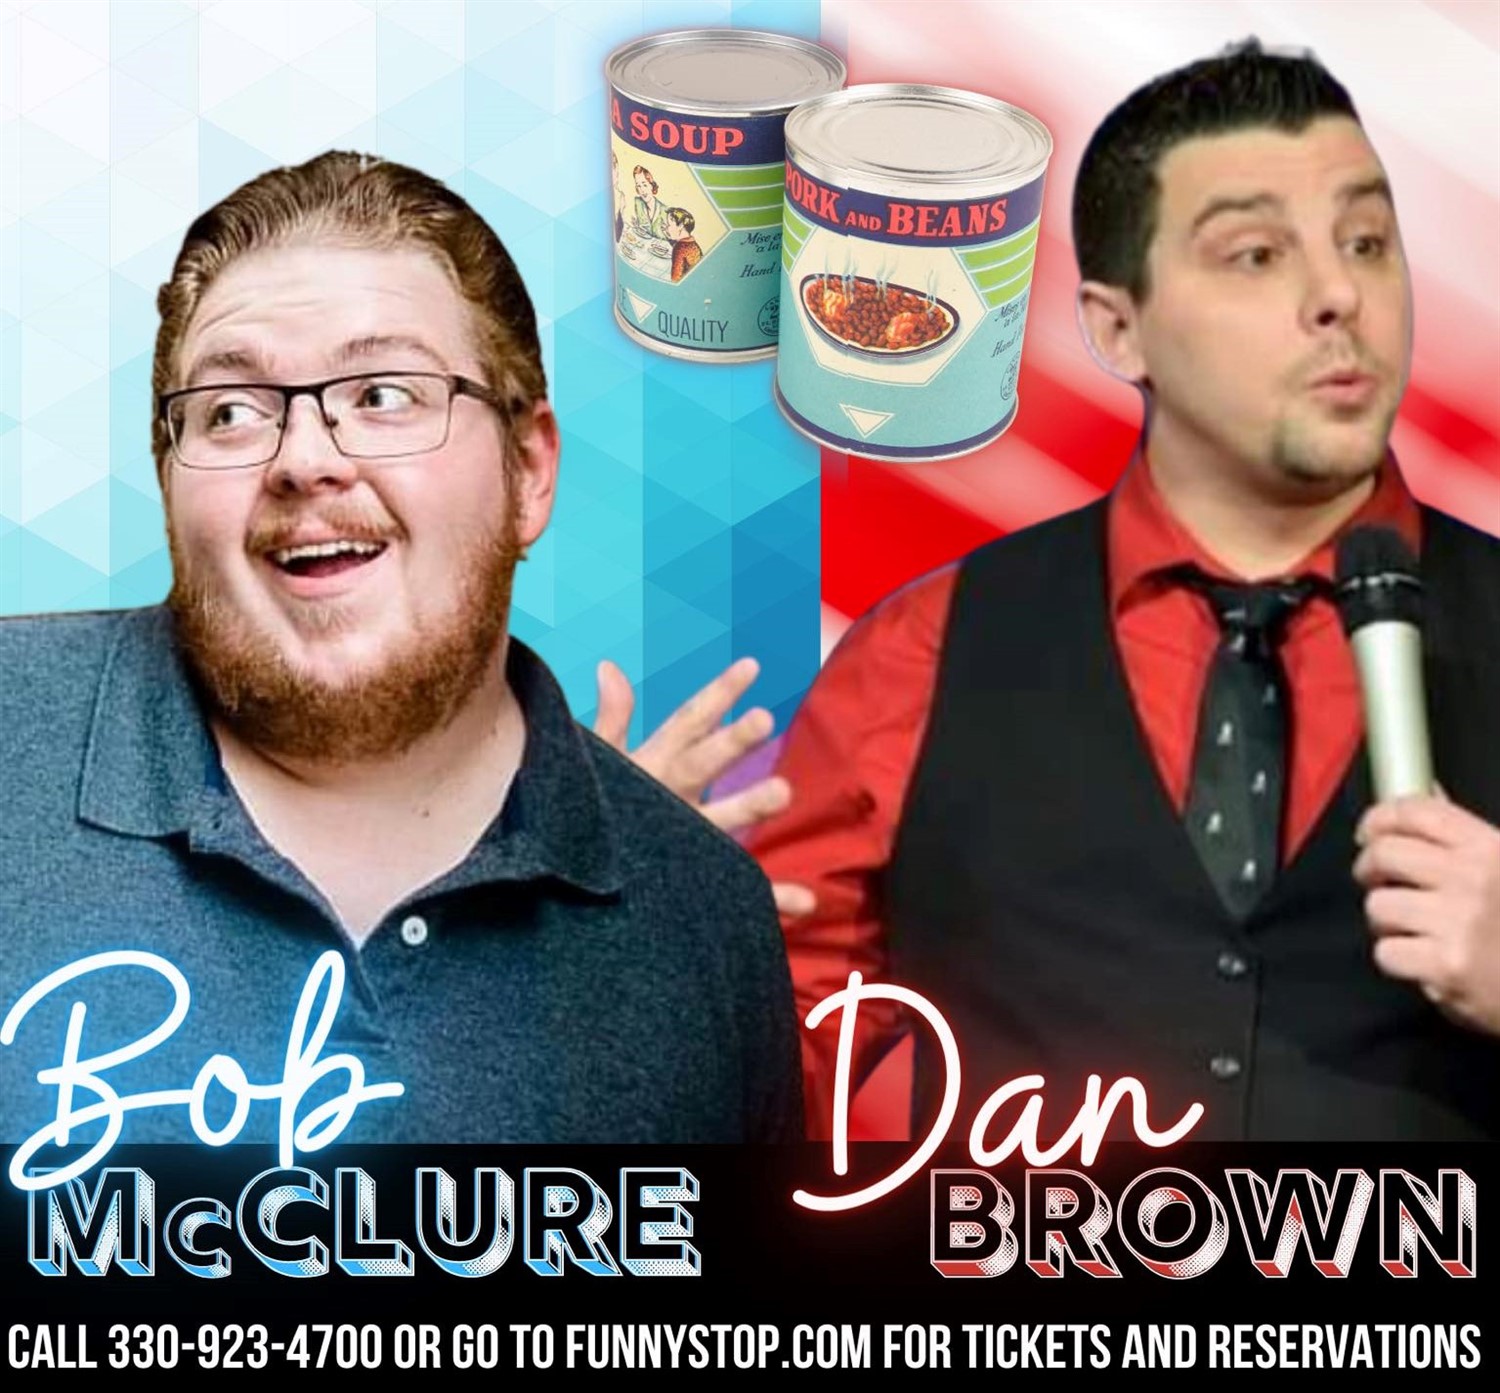 Bob McClure and Dan Brown 8pm show Funny Stop Comedy Club on Dec 15, 20:00@Funny Stop Comedy Club - Buy tickets and Get information on Funny Stop funnystop.online